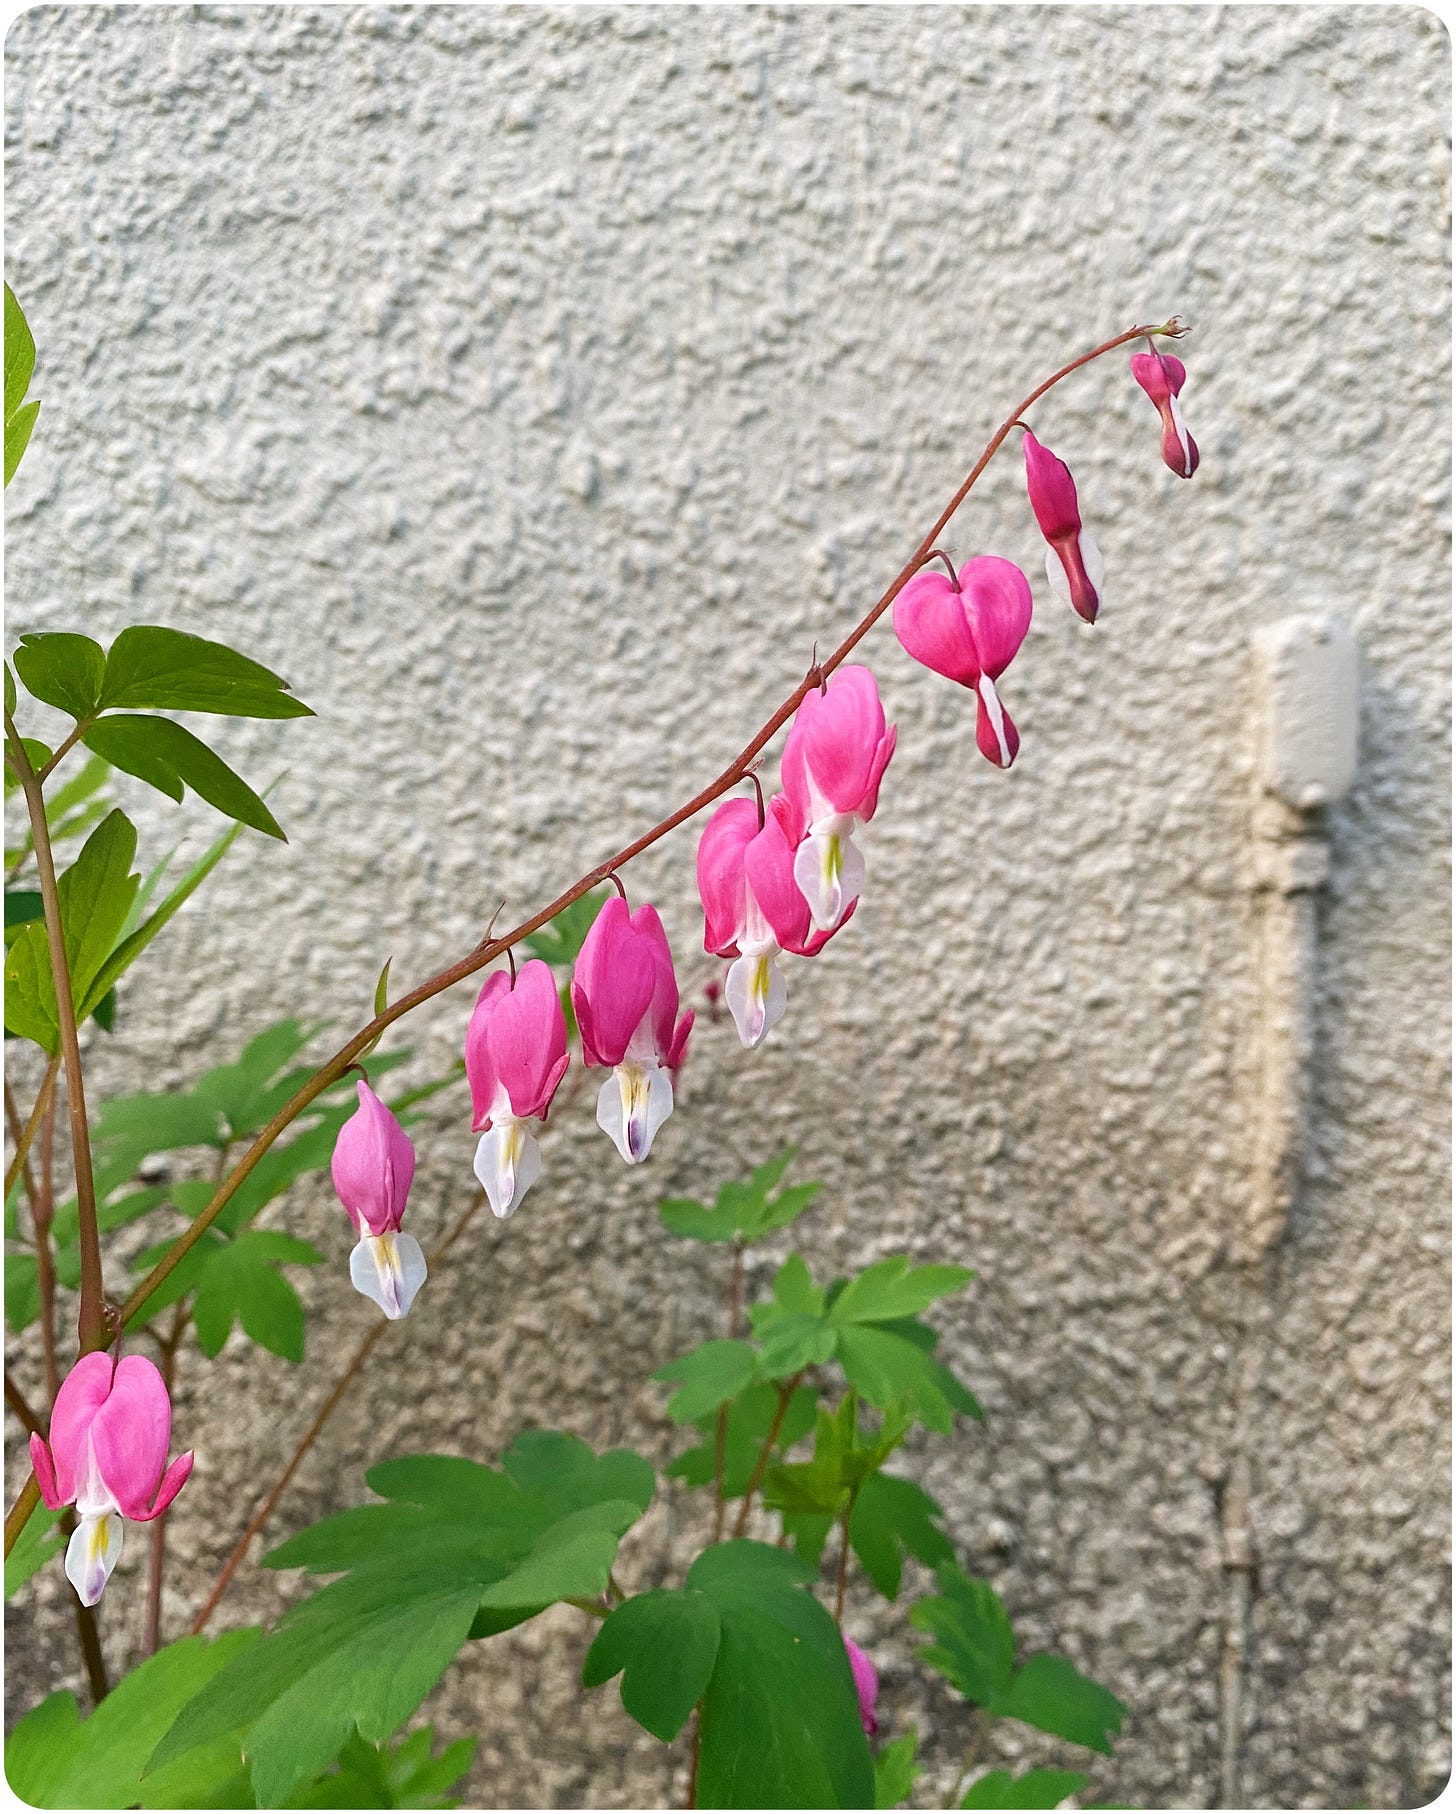 A photograph of pink bleeding hearts backdropped by a stucco wall.